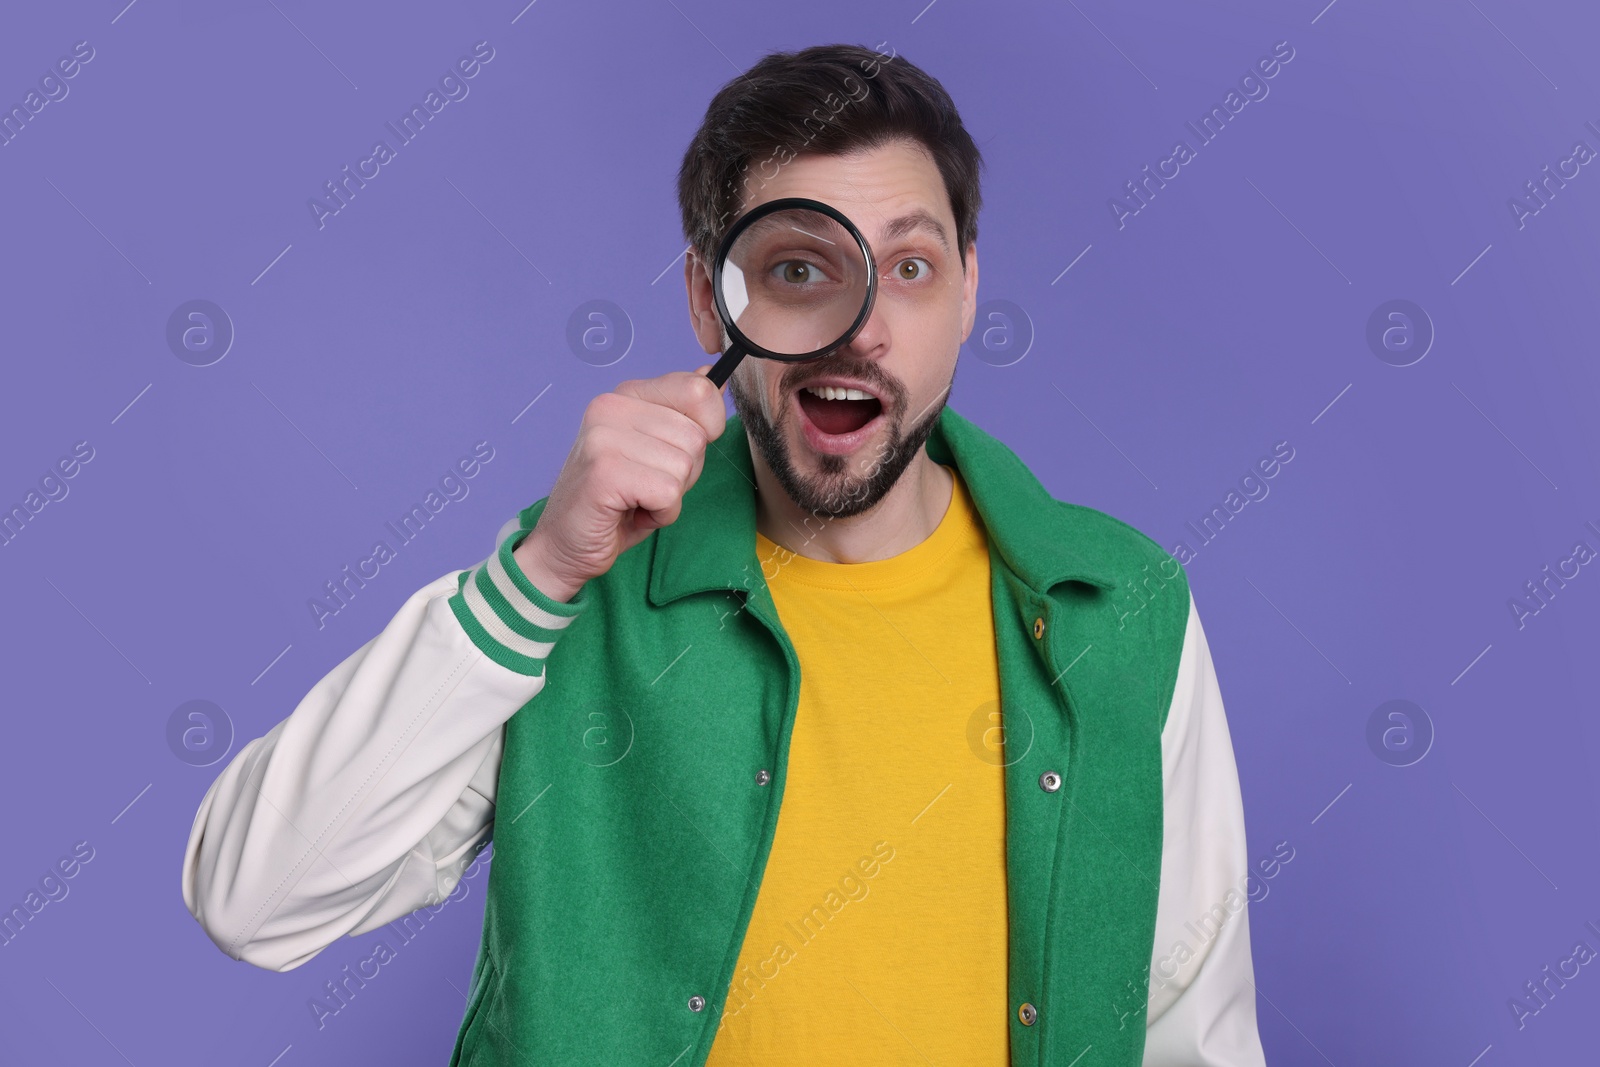 Photo of Emotional man looking through magnifier glass on purple background